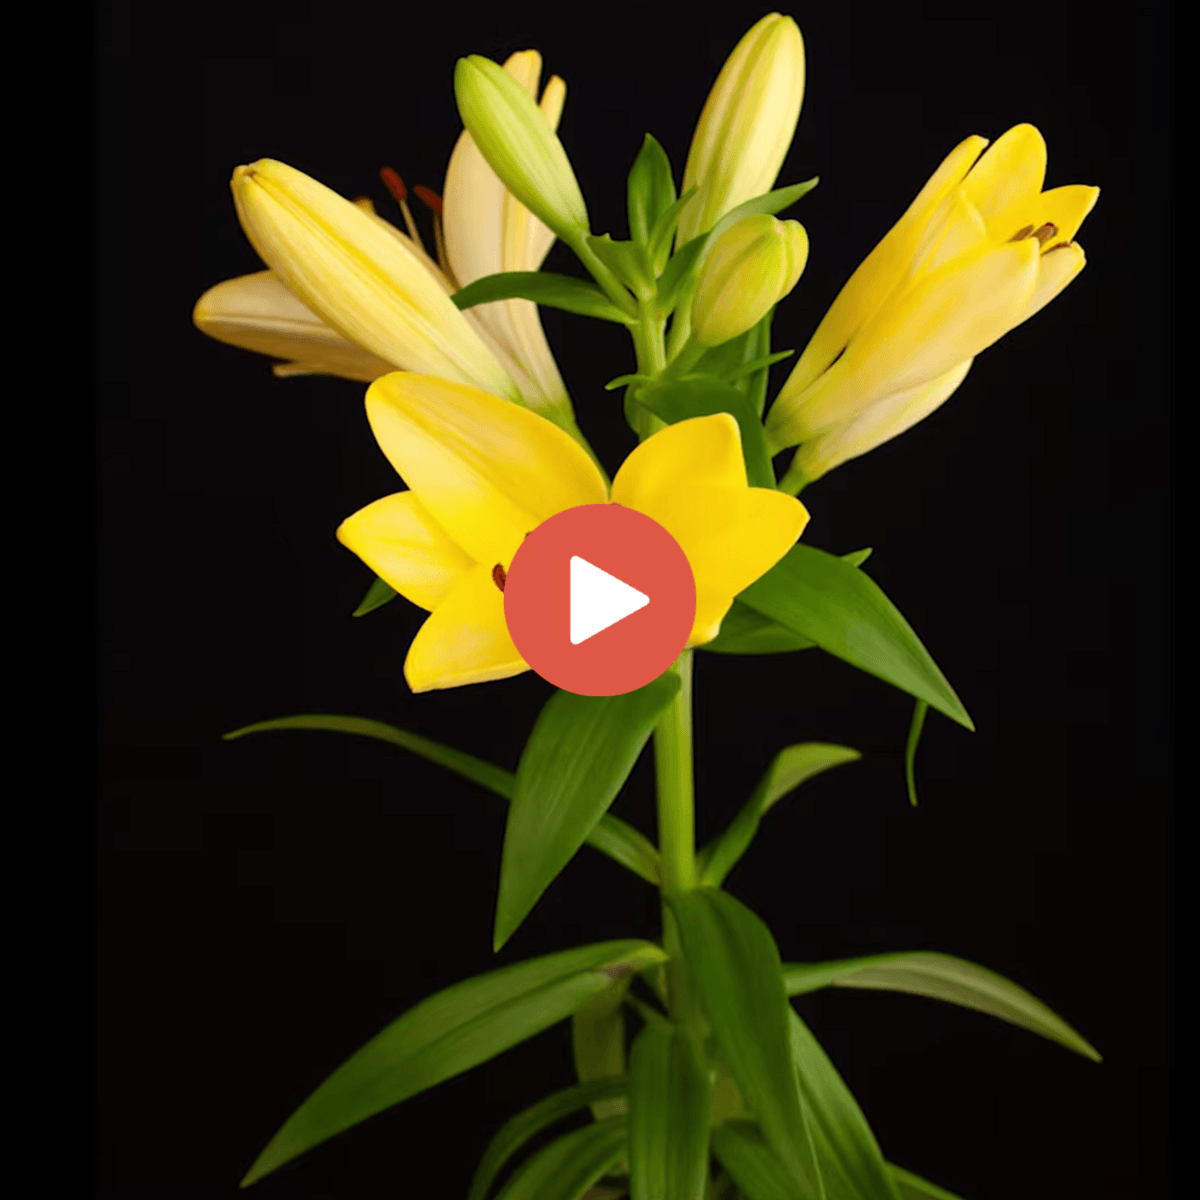 lily-aygo-time-lapse-featured